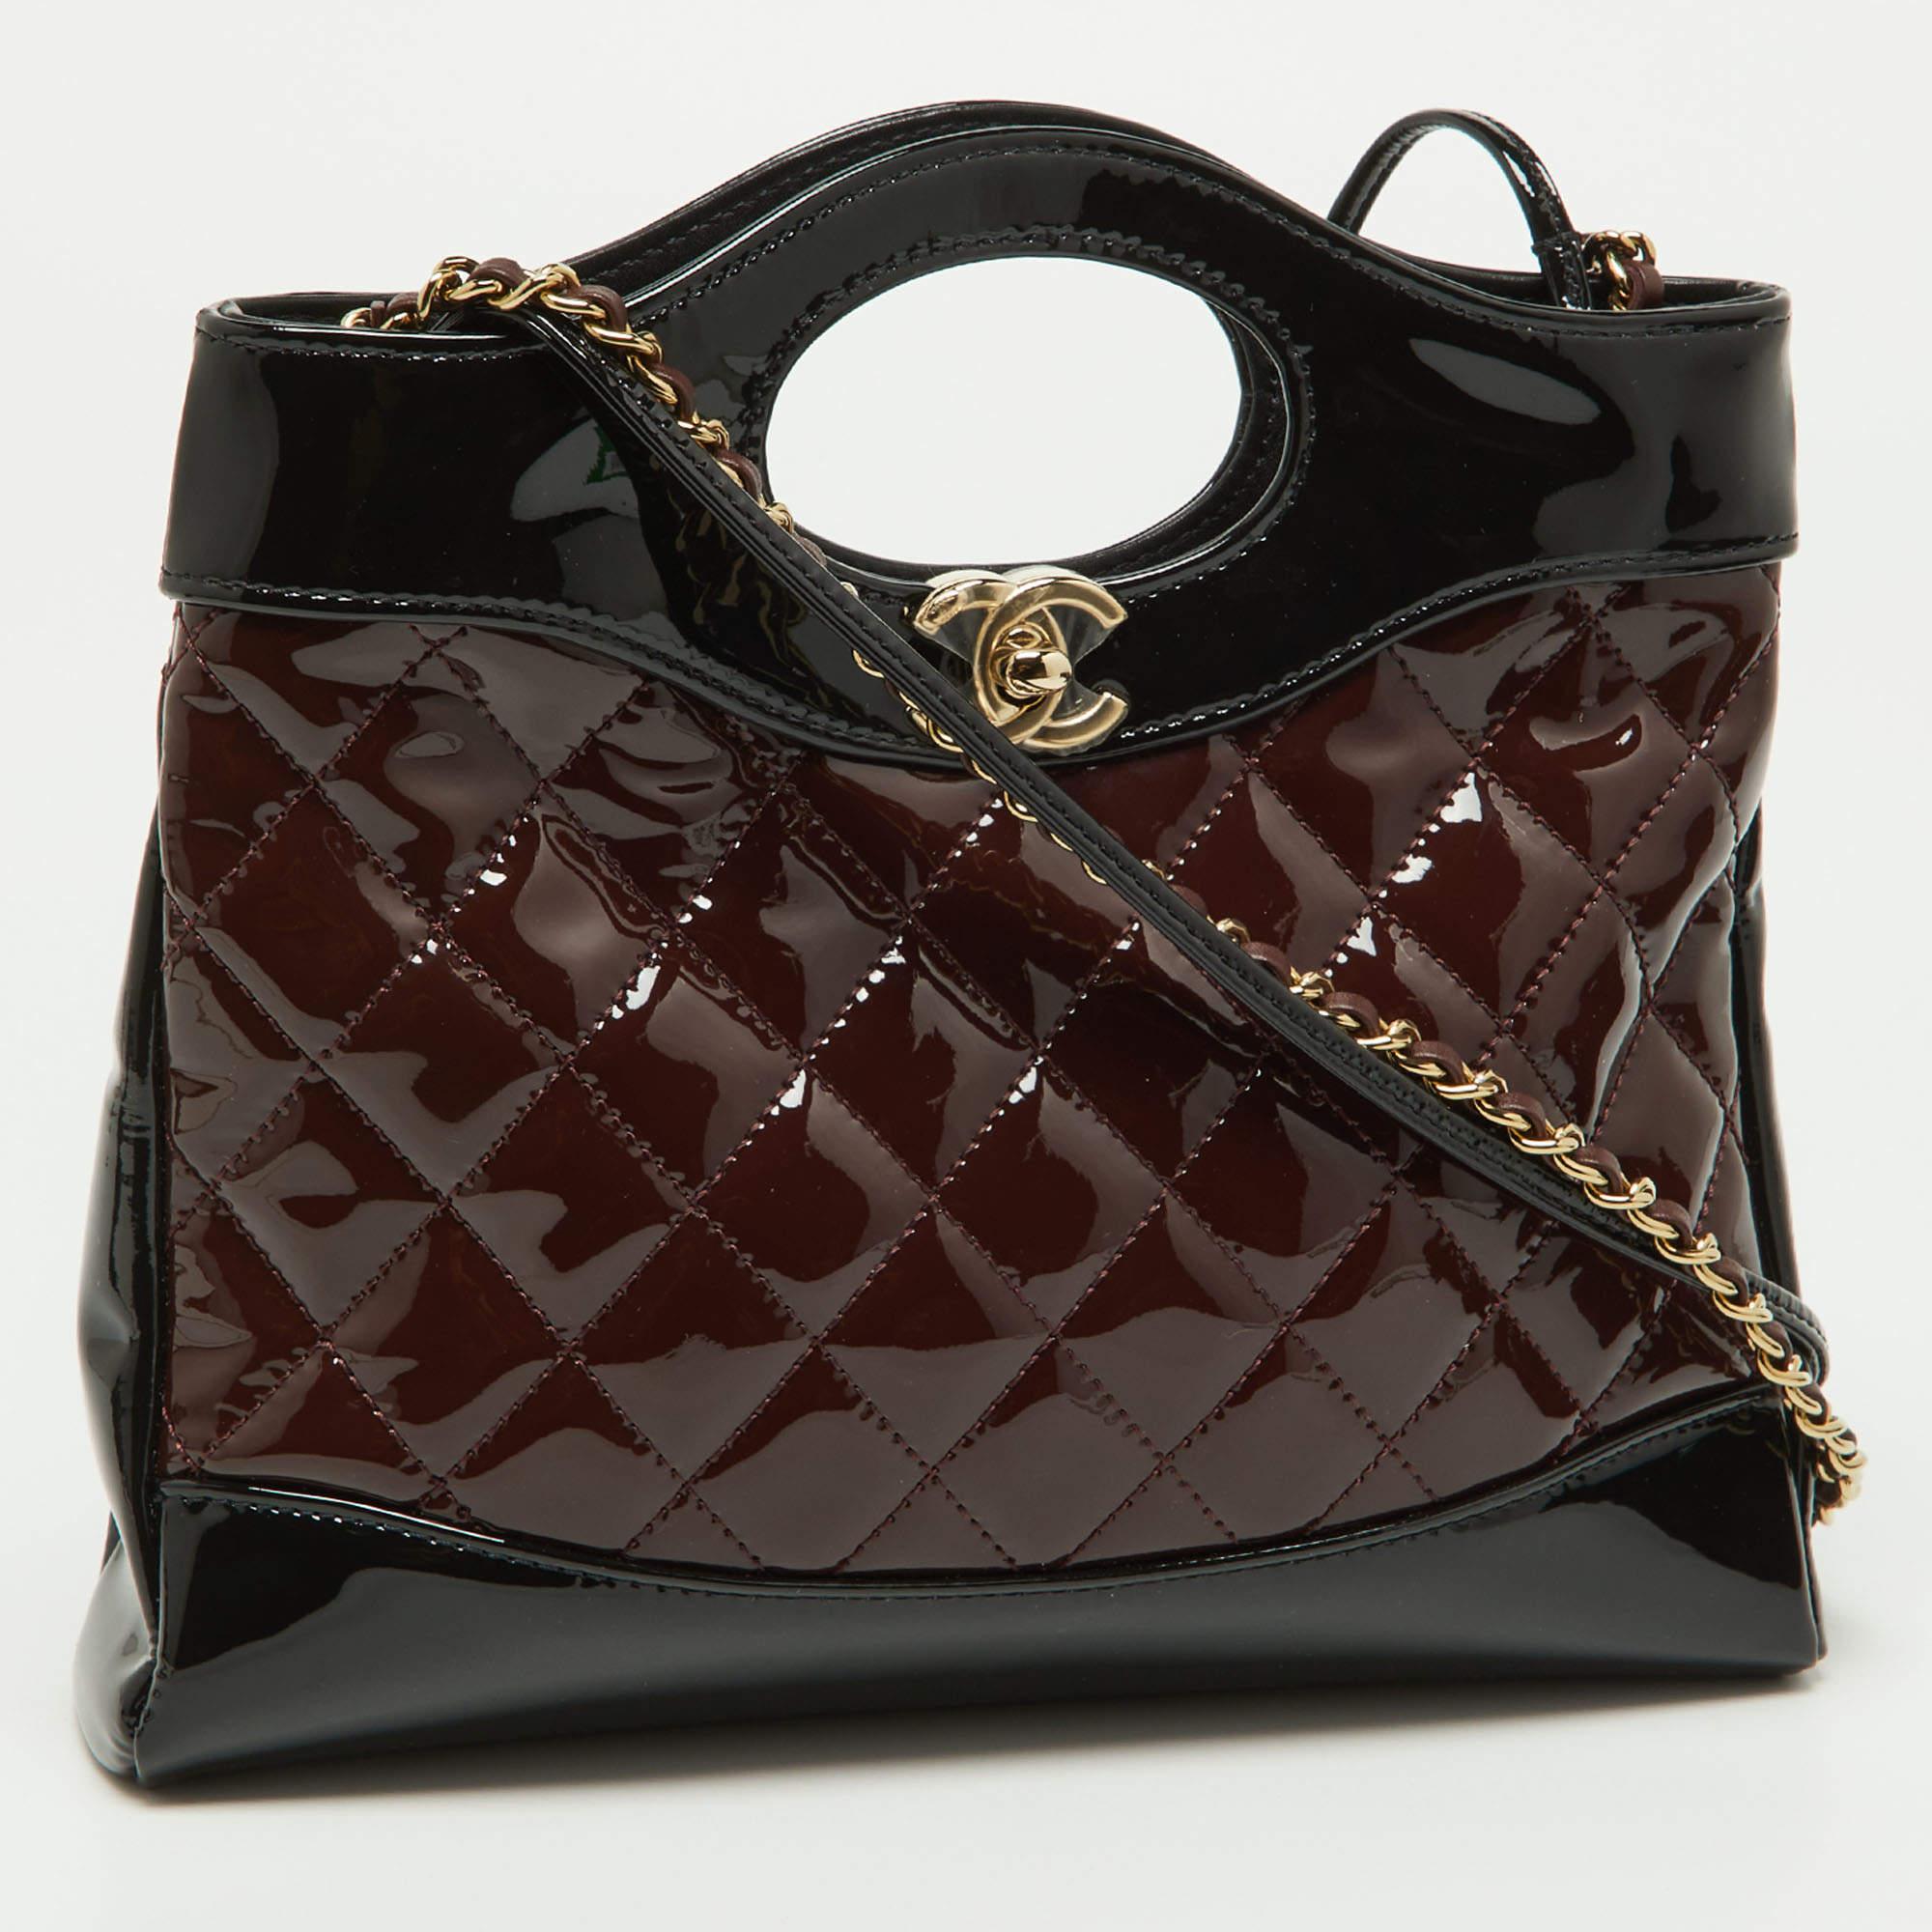 Chanel Black/Burgundy Quilted Patent Leather Mini 31 Shopping Tote In Excellent Condition For Sale In Dubai, Al Qouz 2